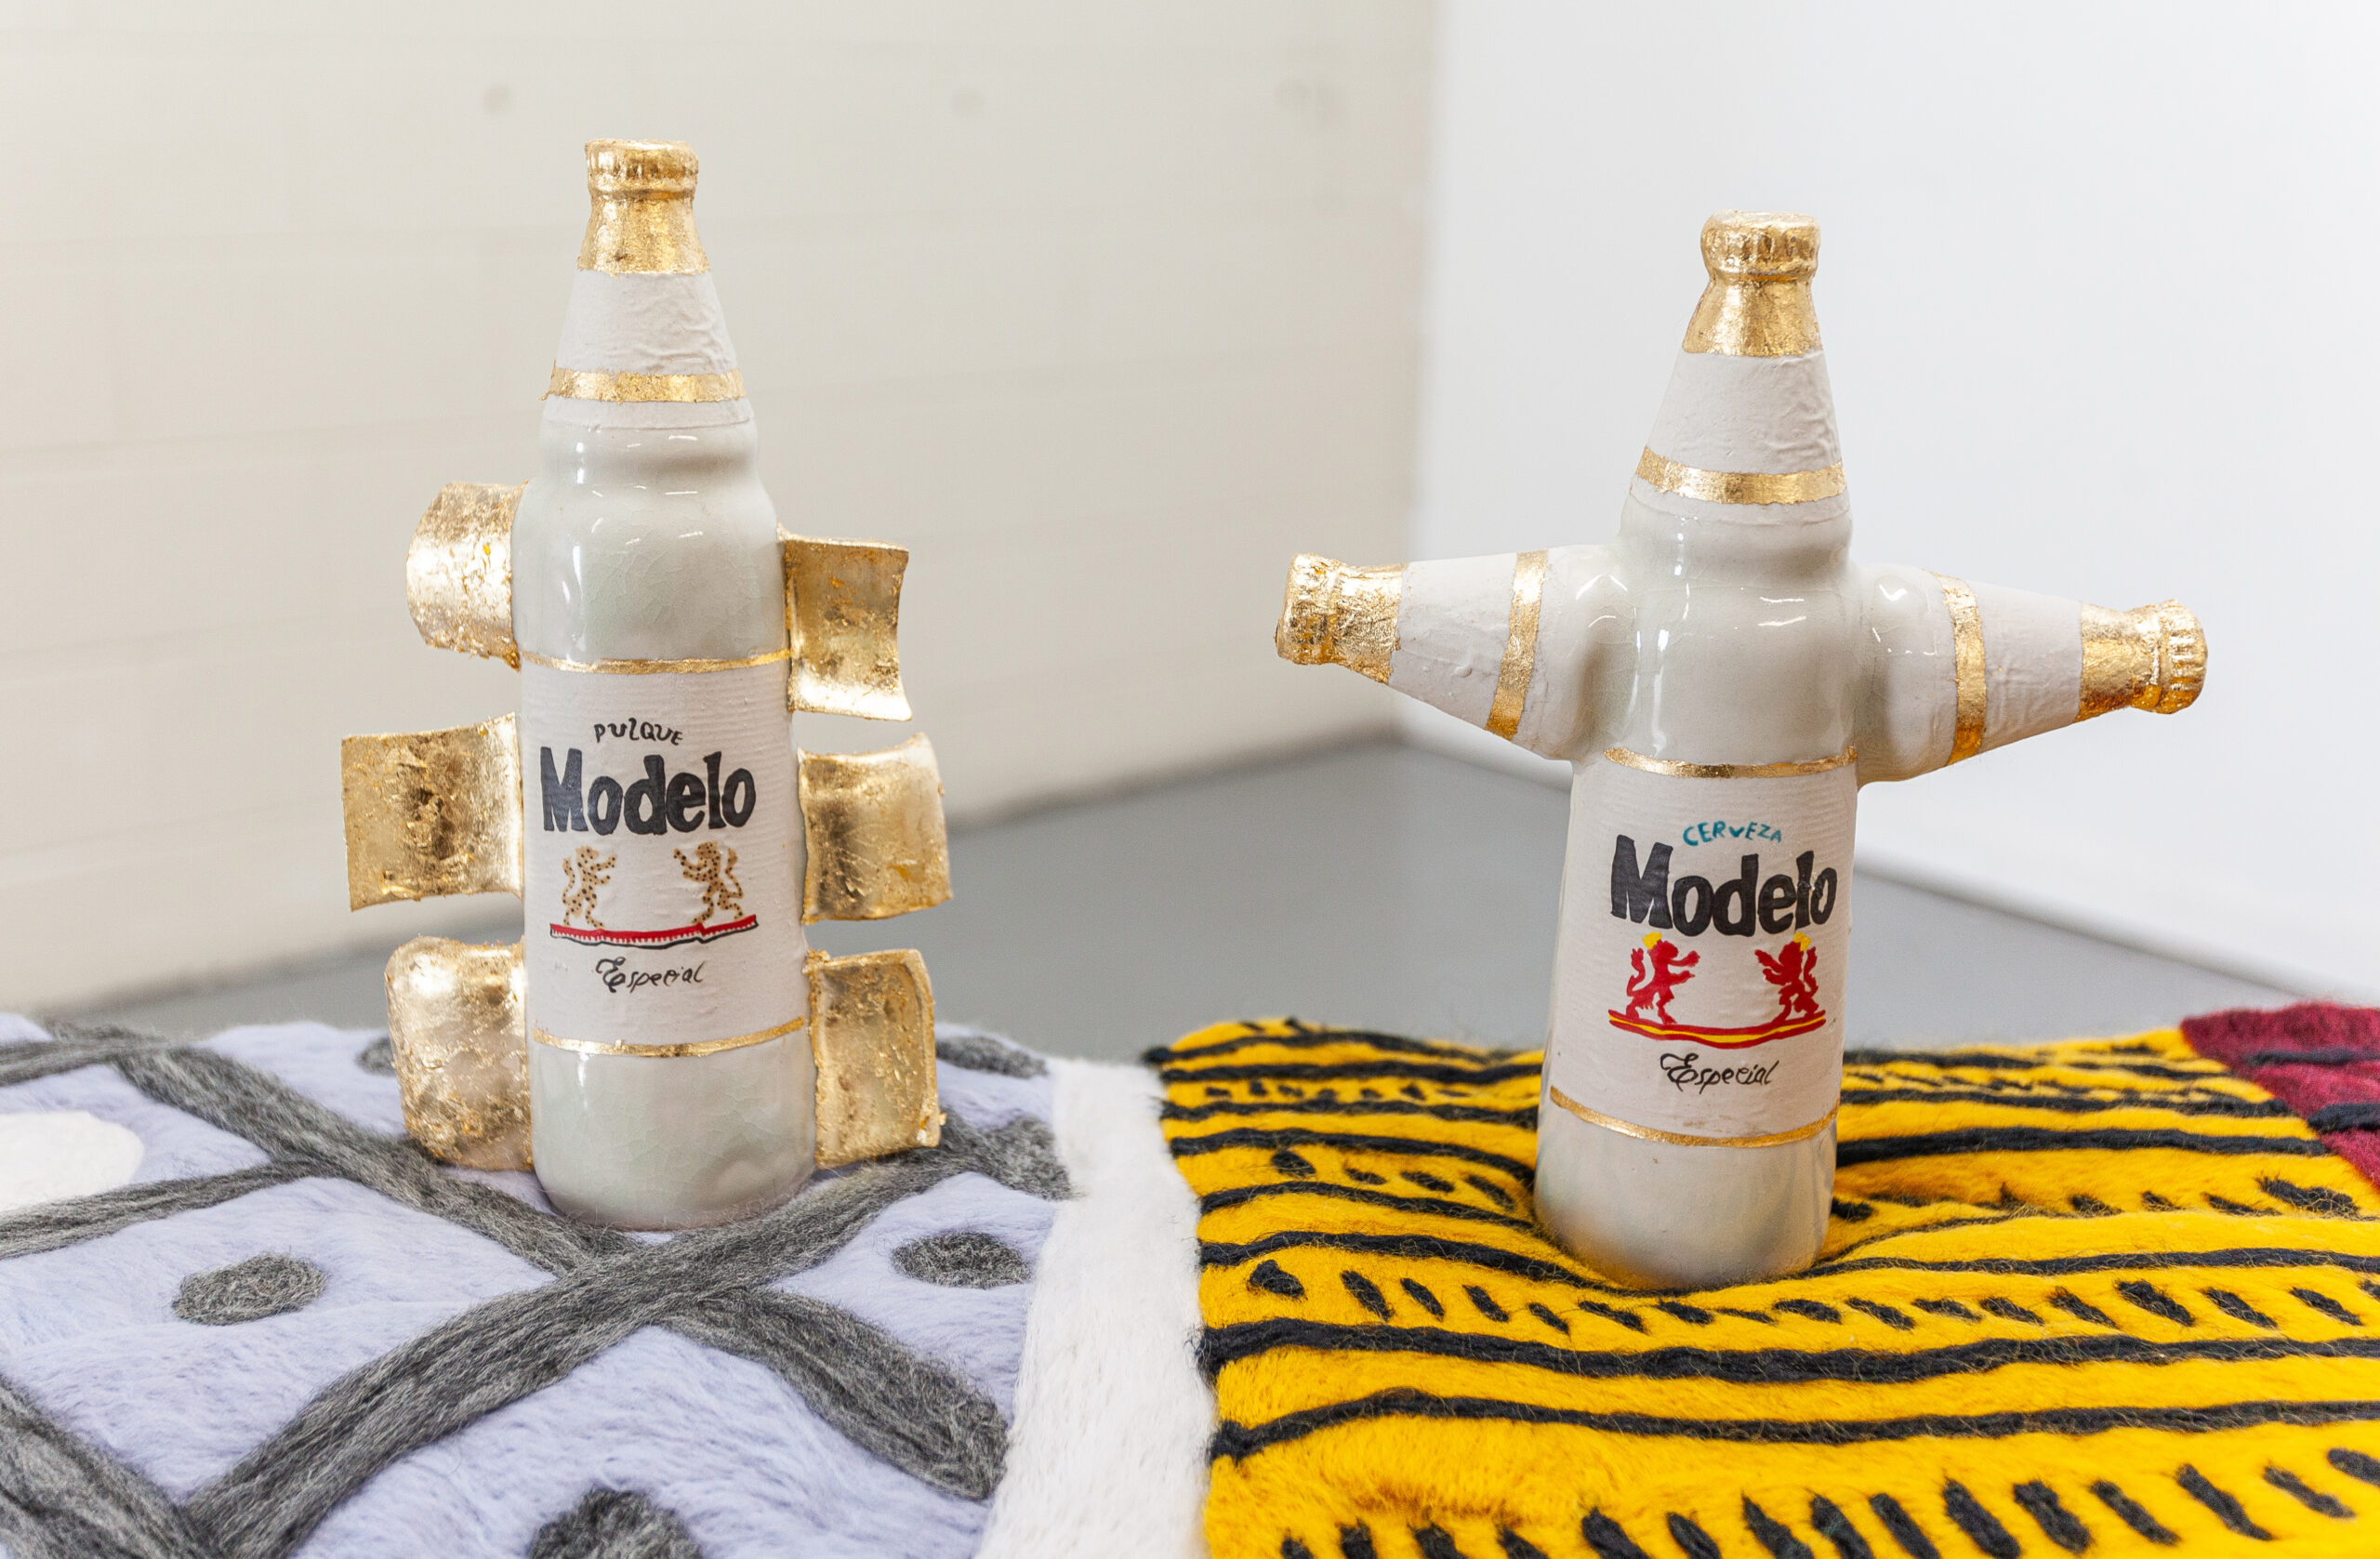 Ceramic Modelo bottles fashioned like a Macuahuitl and cross on felted mats atop a painted pedestal reminiscent of the one that the Mexica gods of life and death stand on.